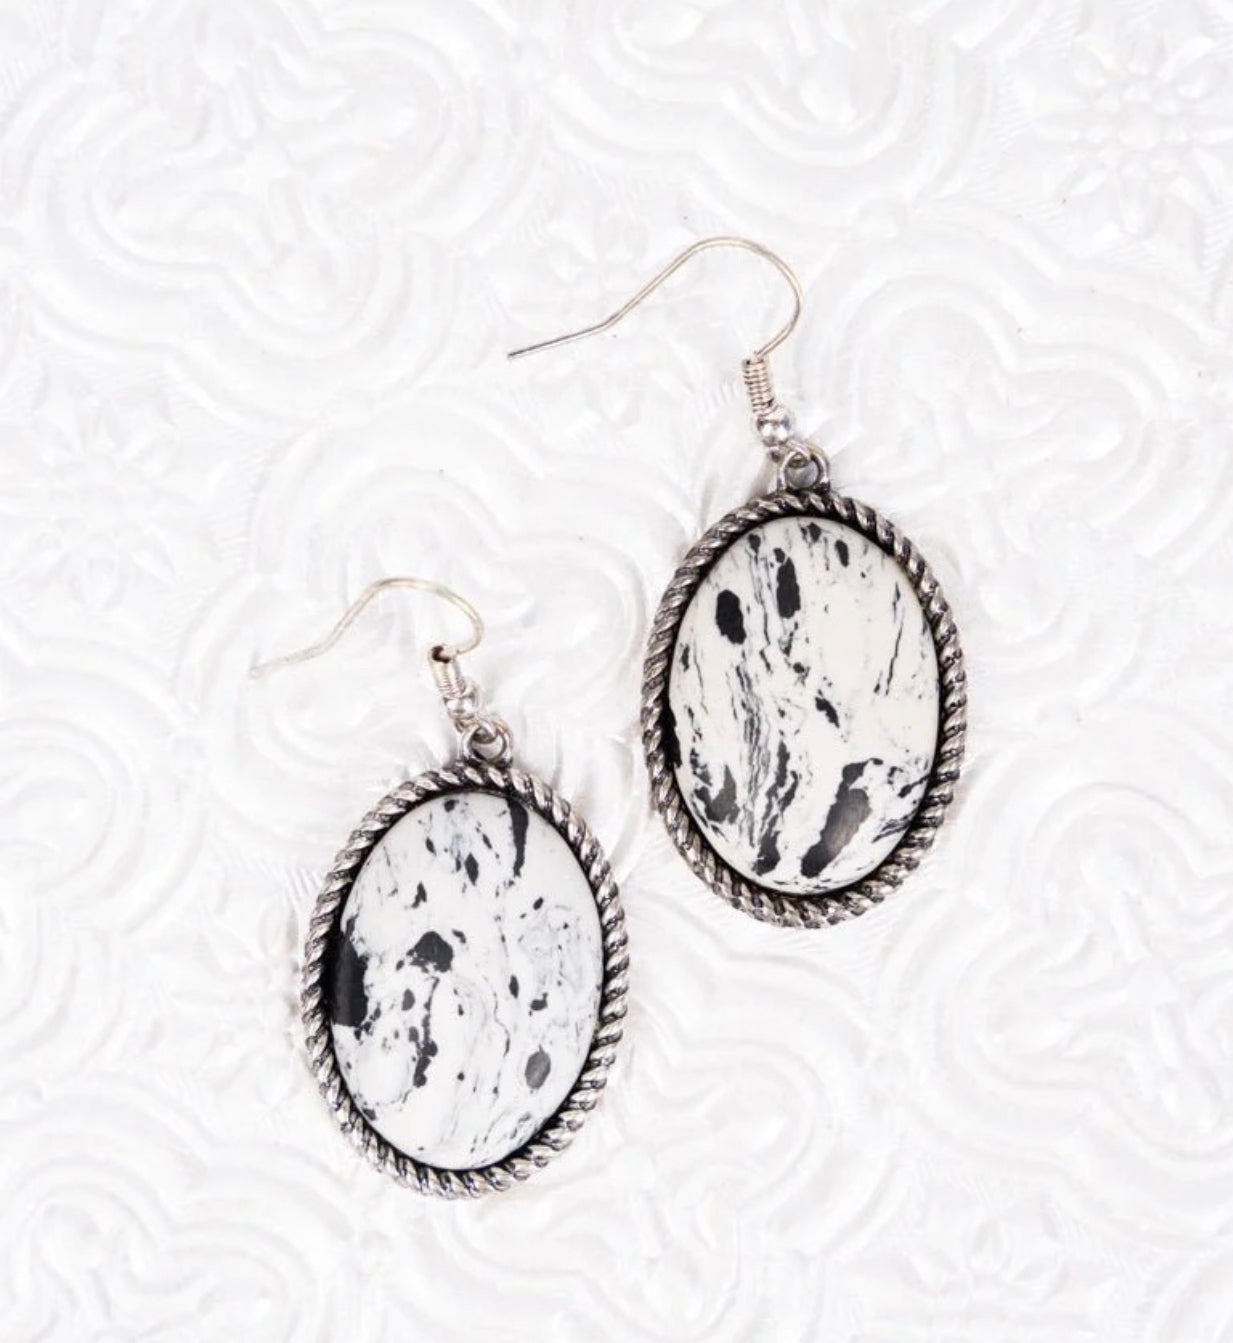 Black and white marbles oval earrings